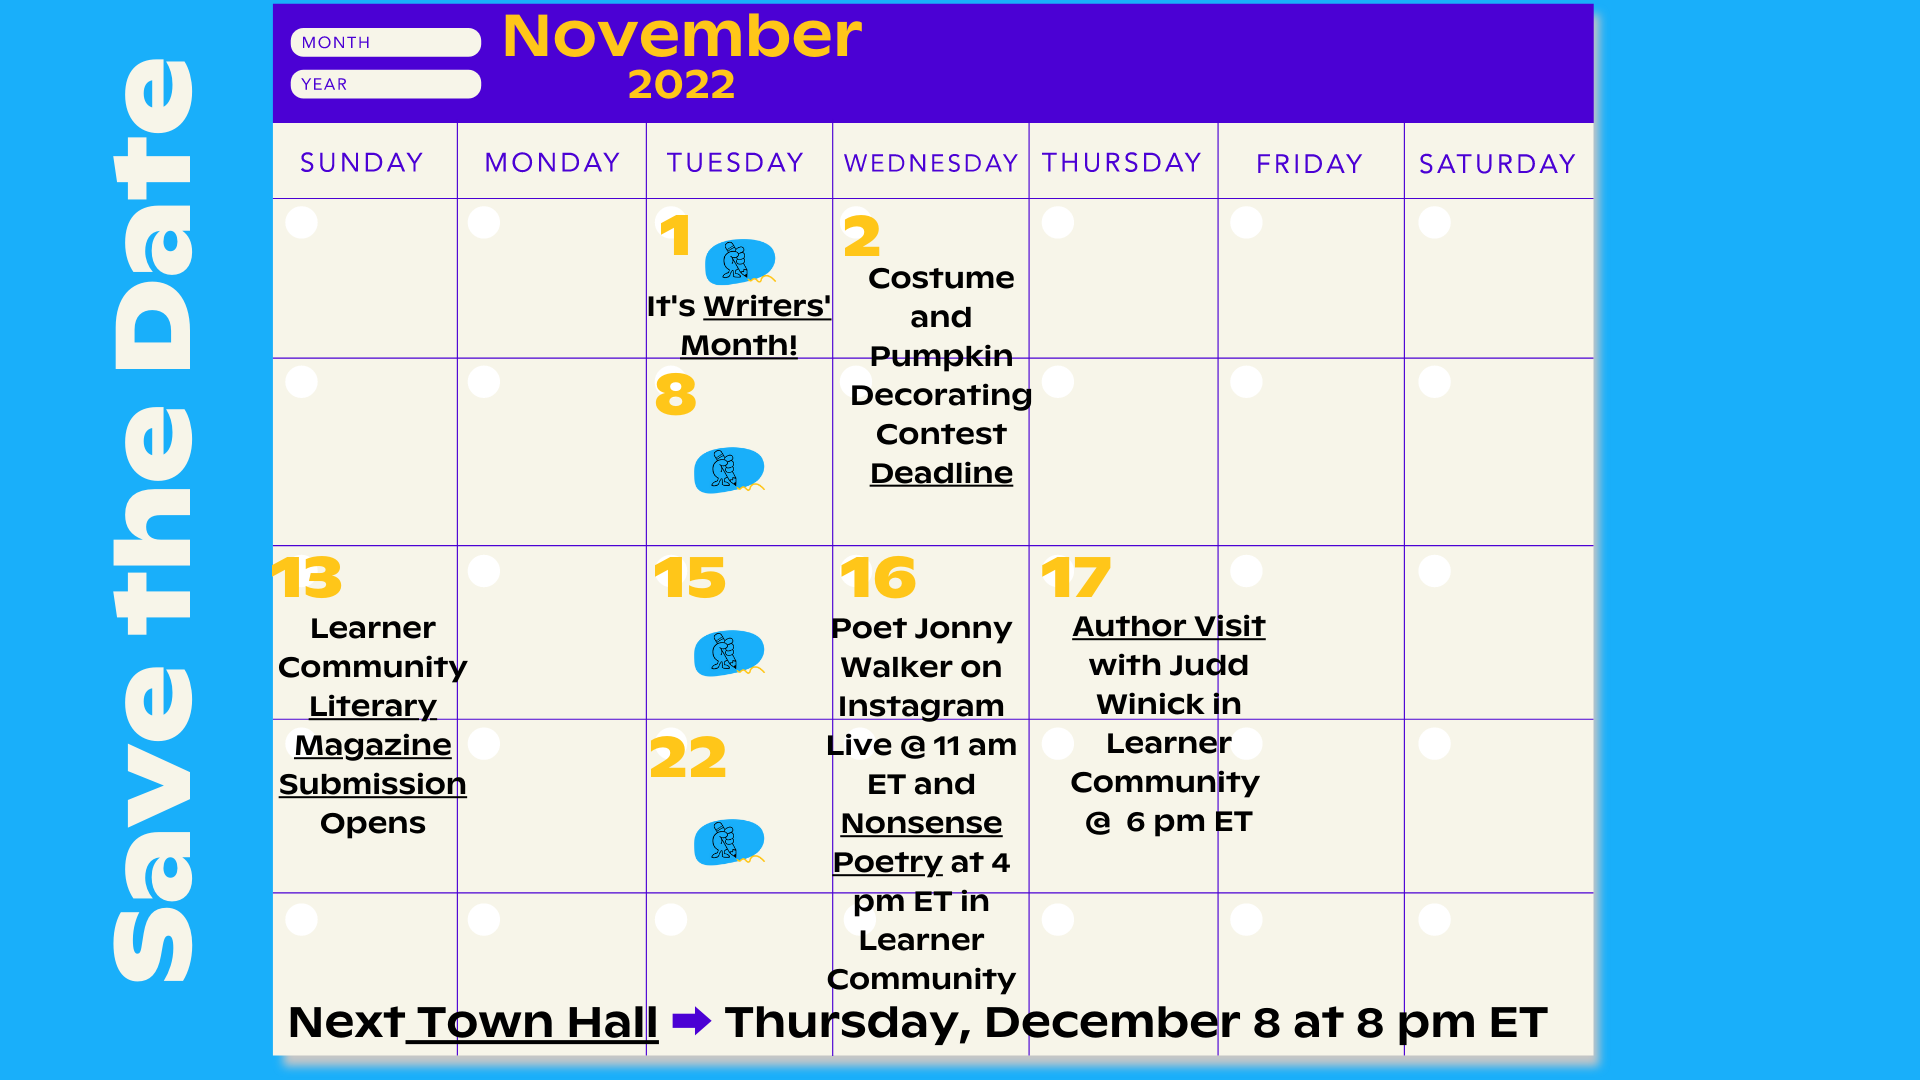 Calendar with upcoming events for November